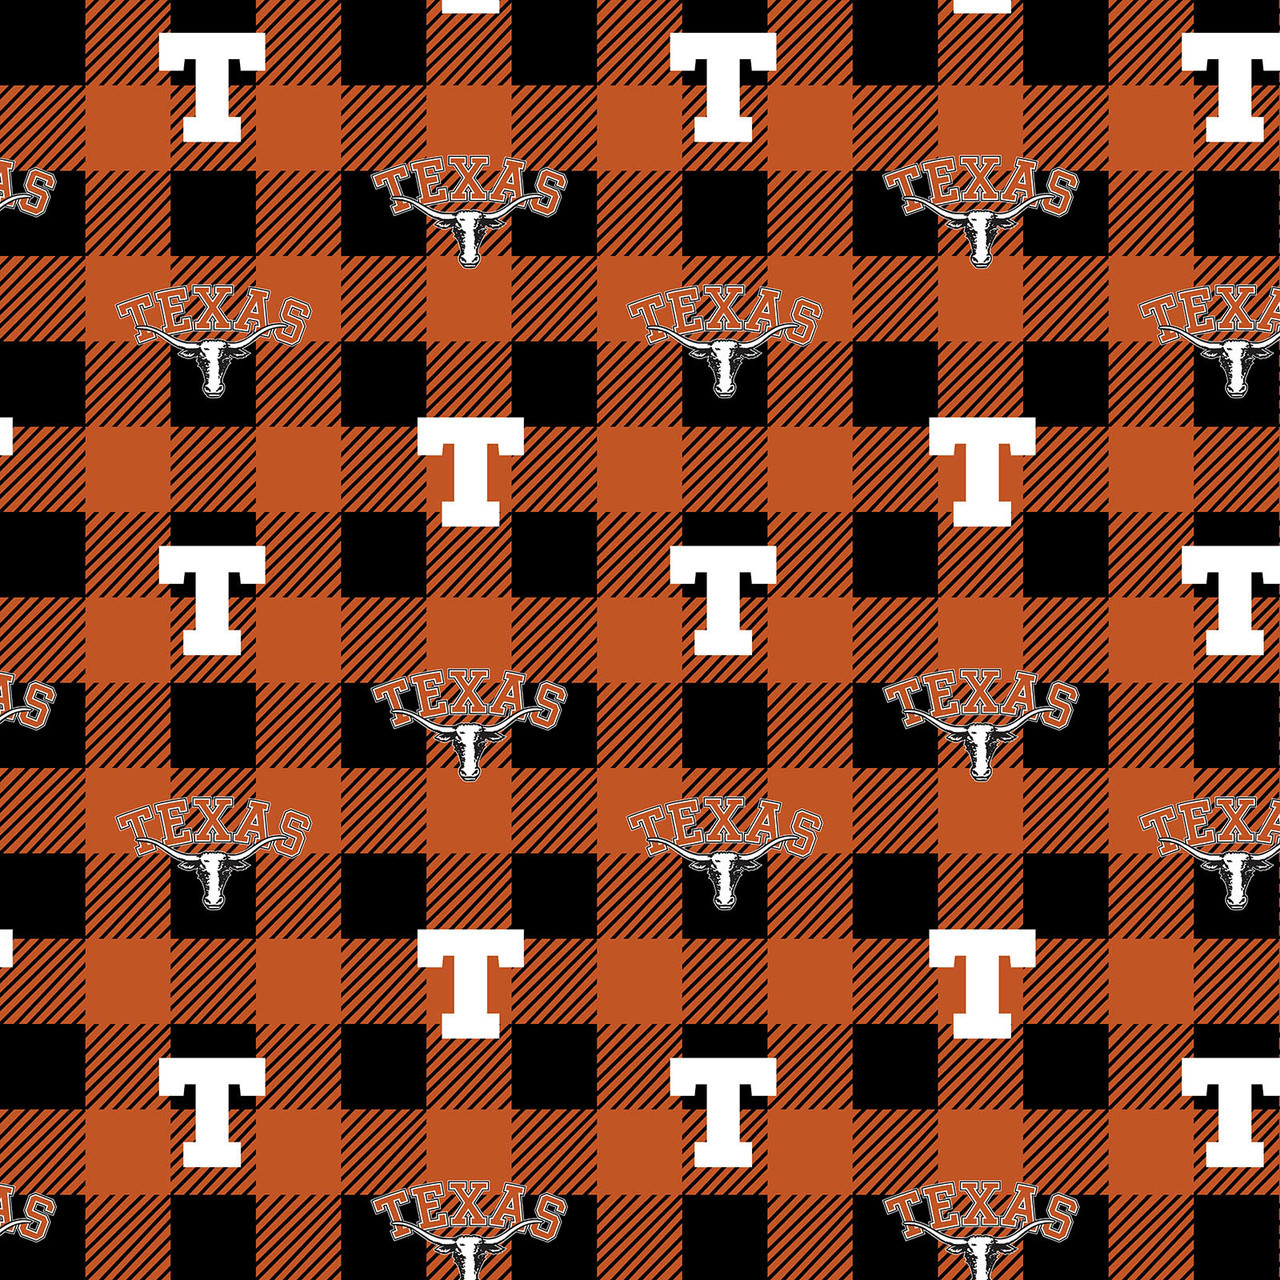 Image of Texas Longhorns Fleece Fabric with Buffalo Plaid design-Sold by the Yard